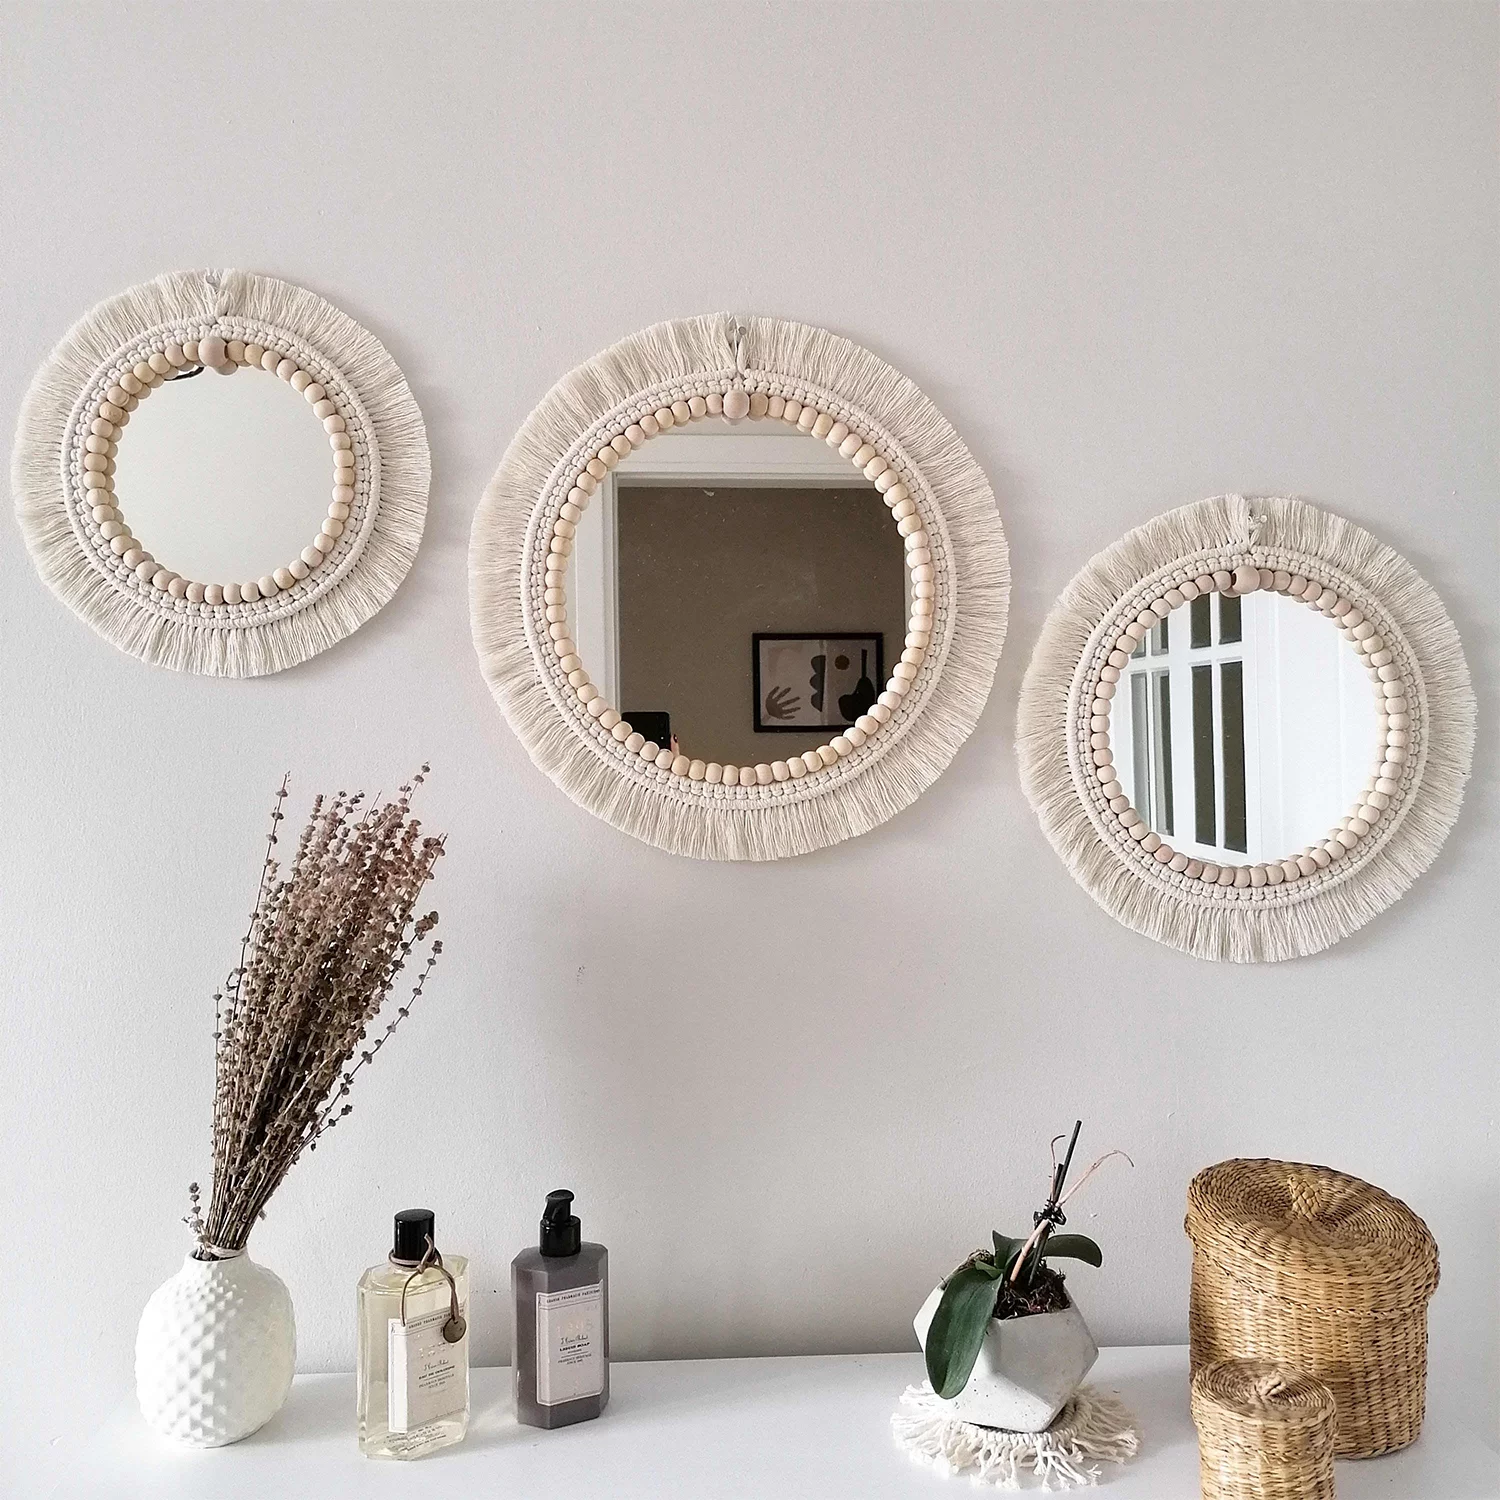 Handmade Macrame Wall Mirror with wooden beads – Set of 3